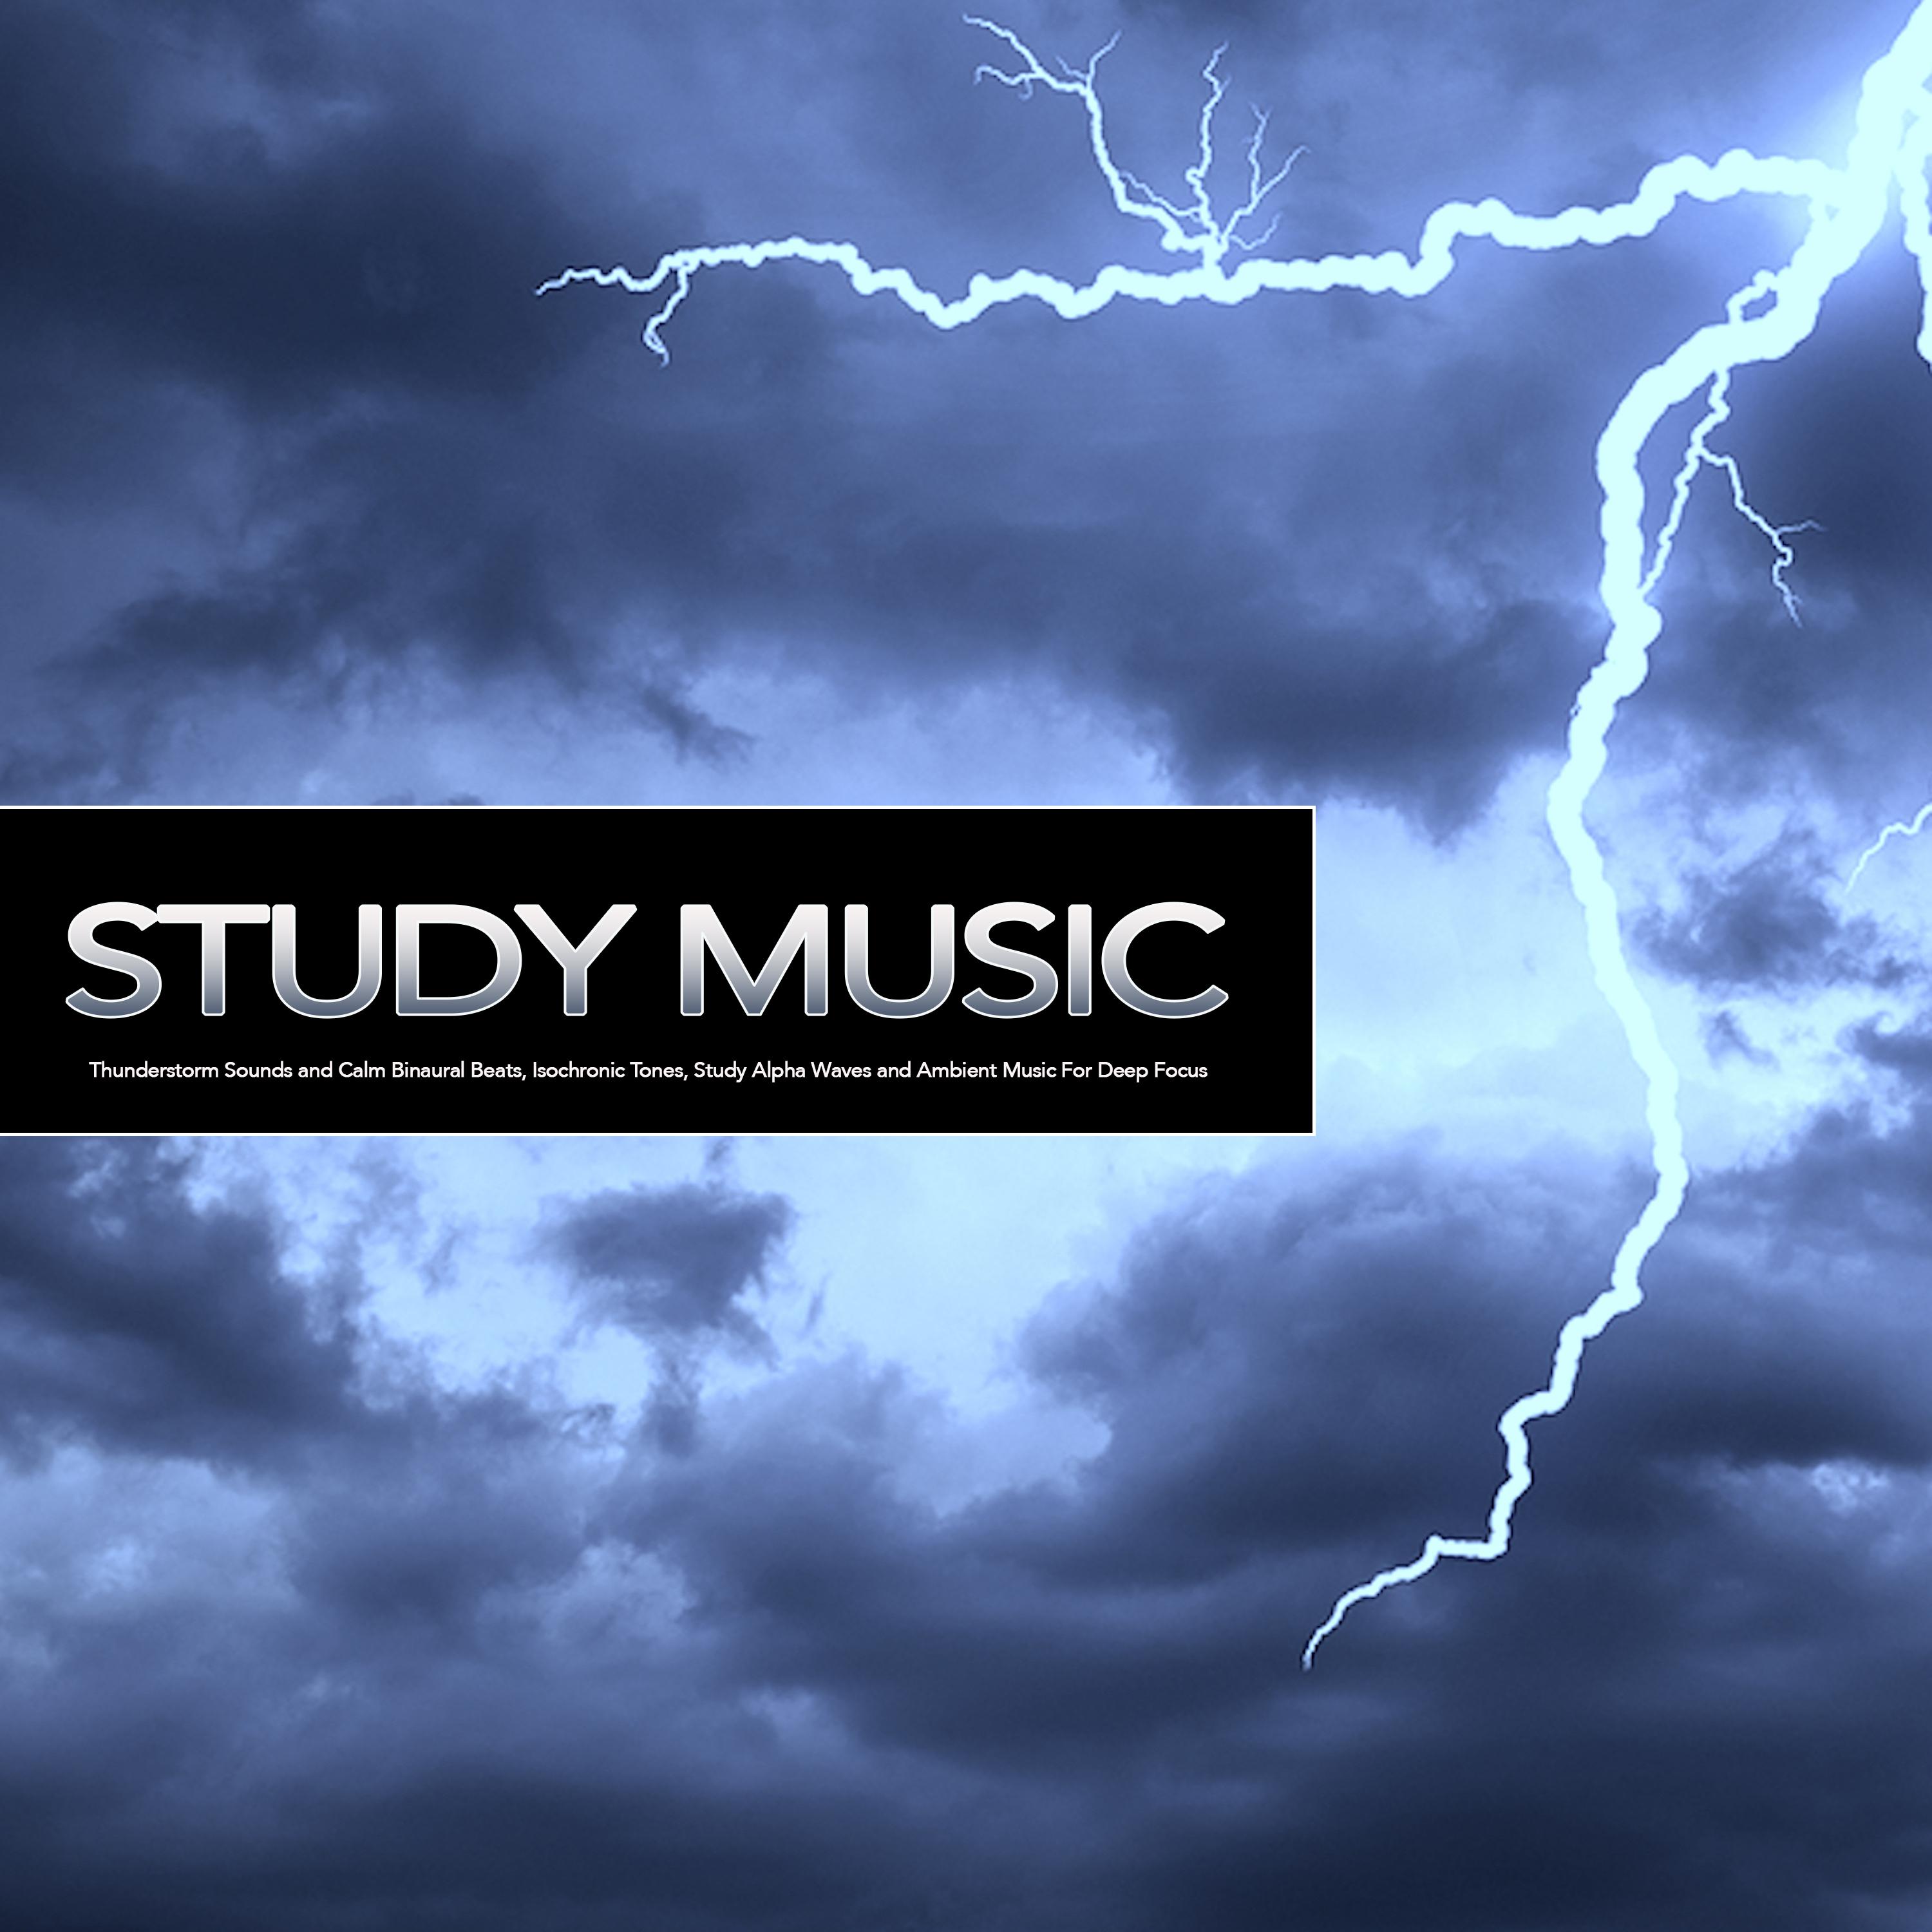 Sounds of Thunder and Binaural Beats For Study